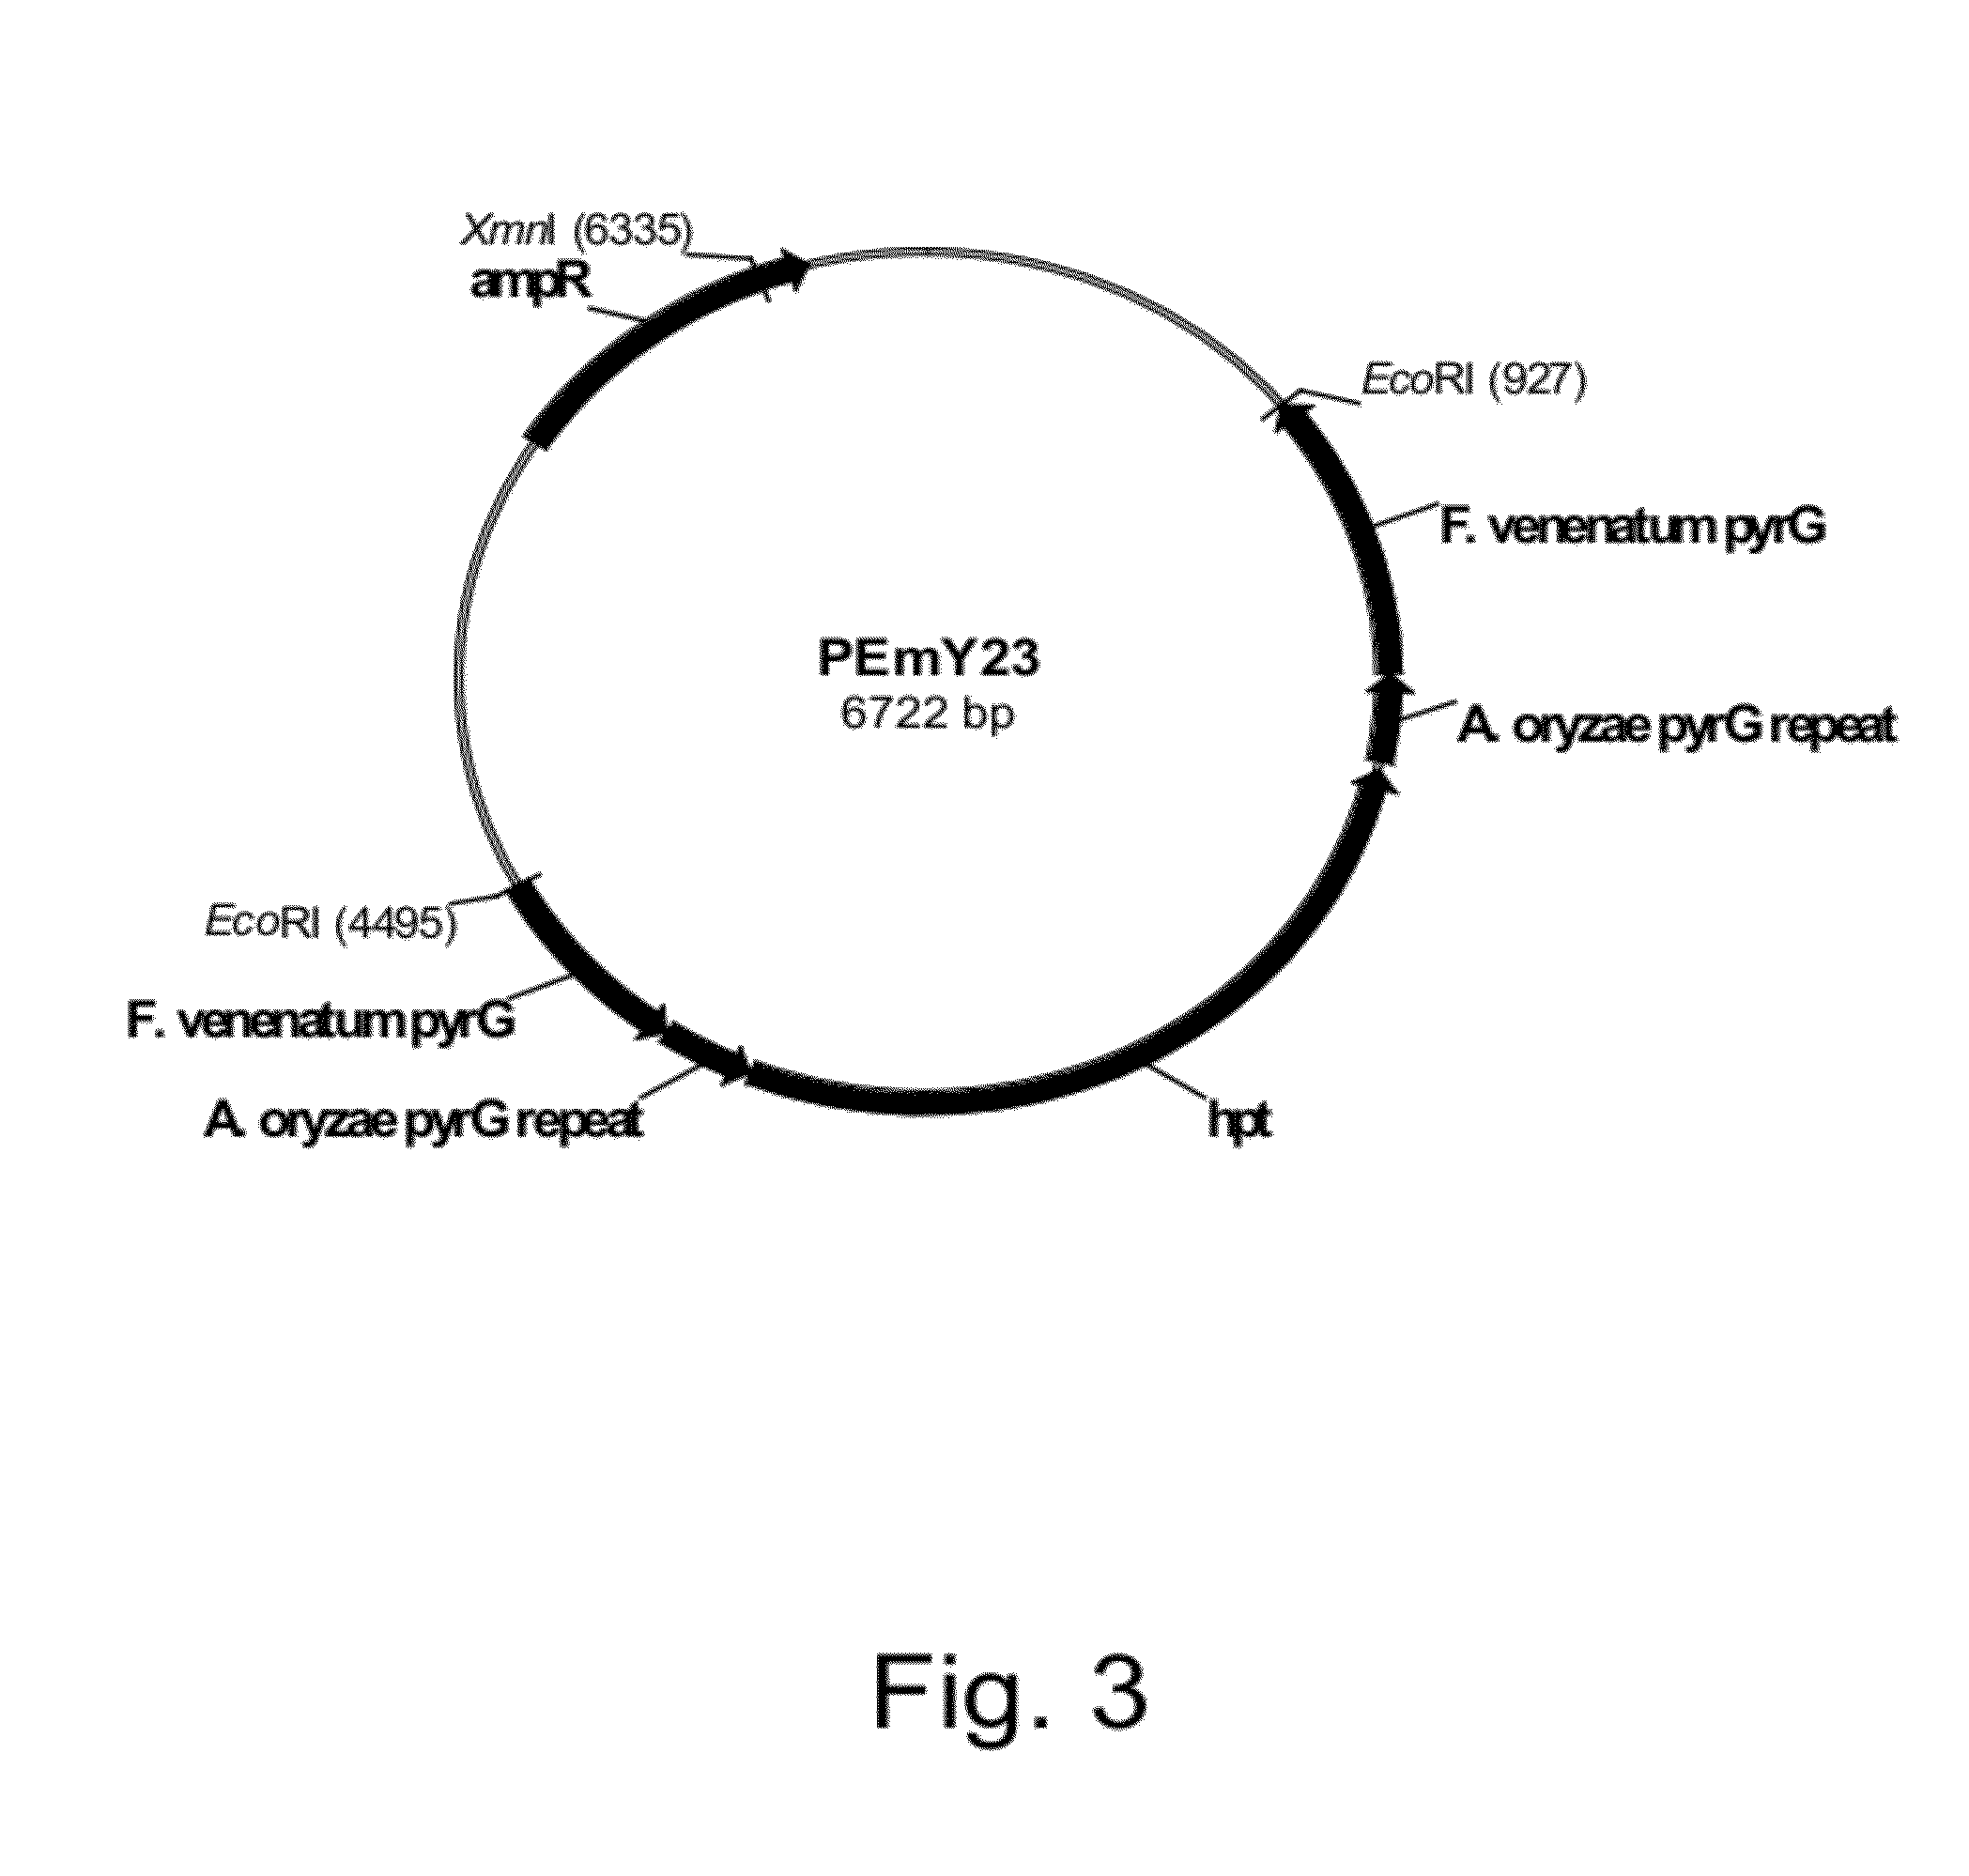 Methods for Producing Polypeptidies in Protease-Deficient Mutants of Trichoderma